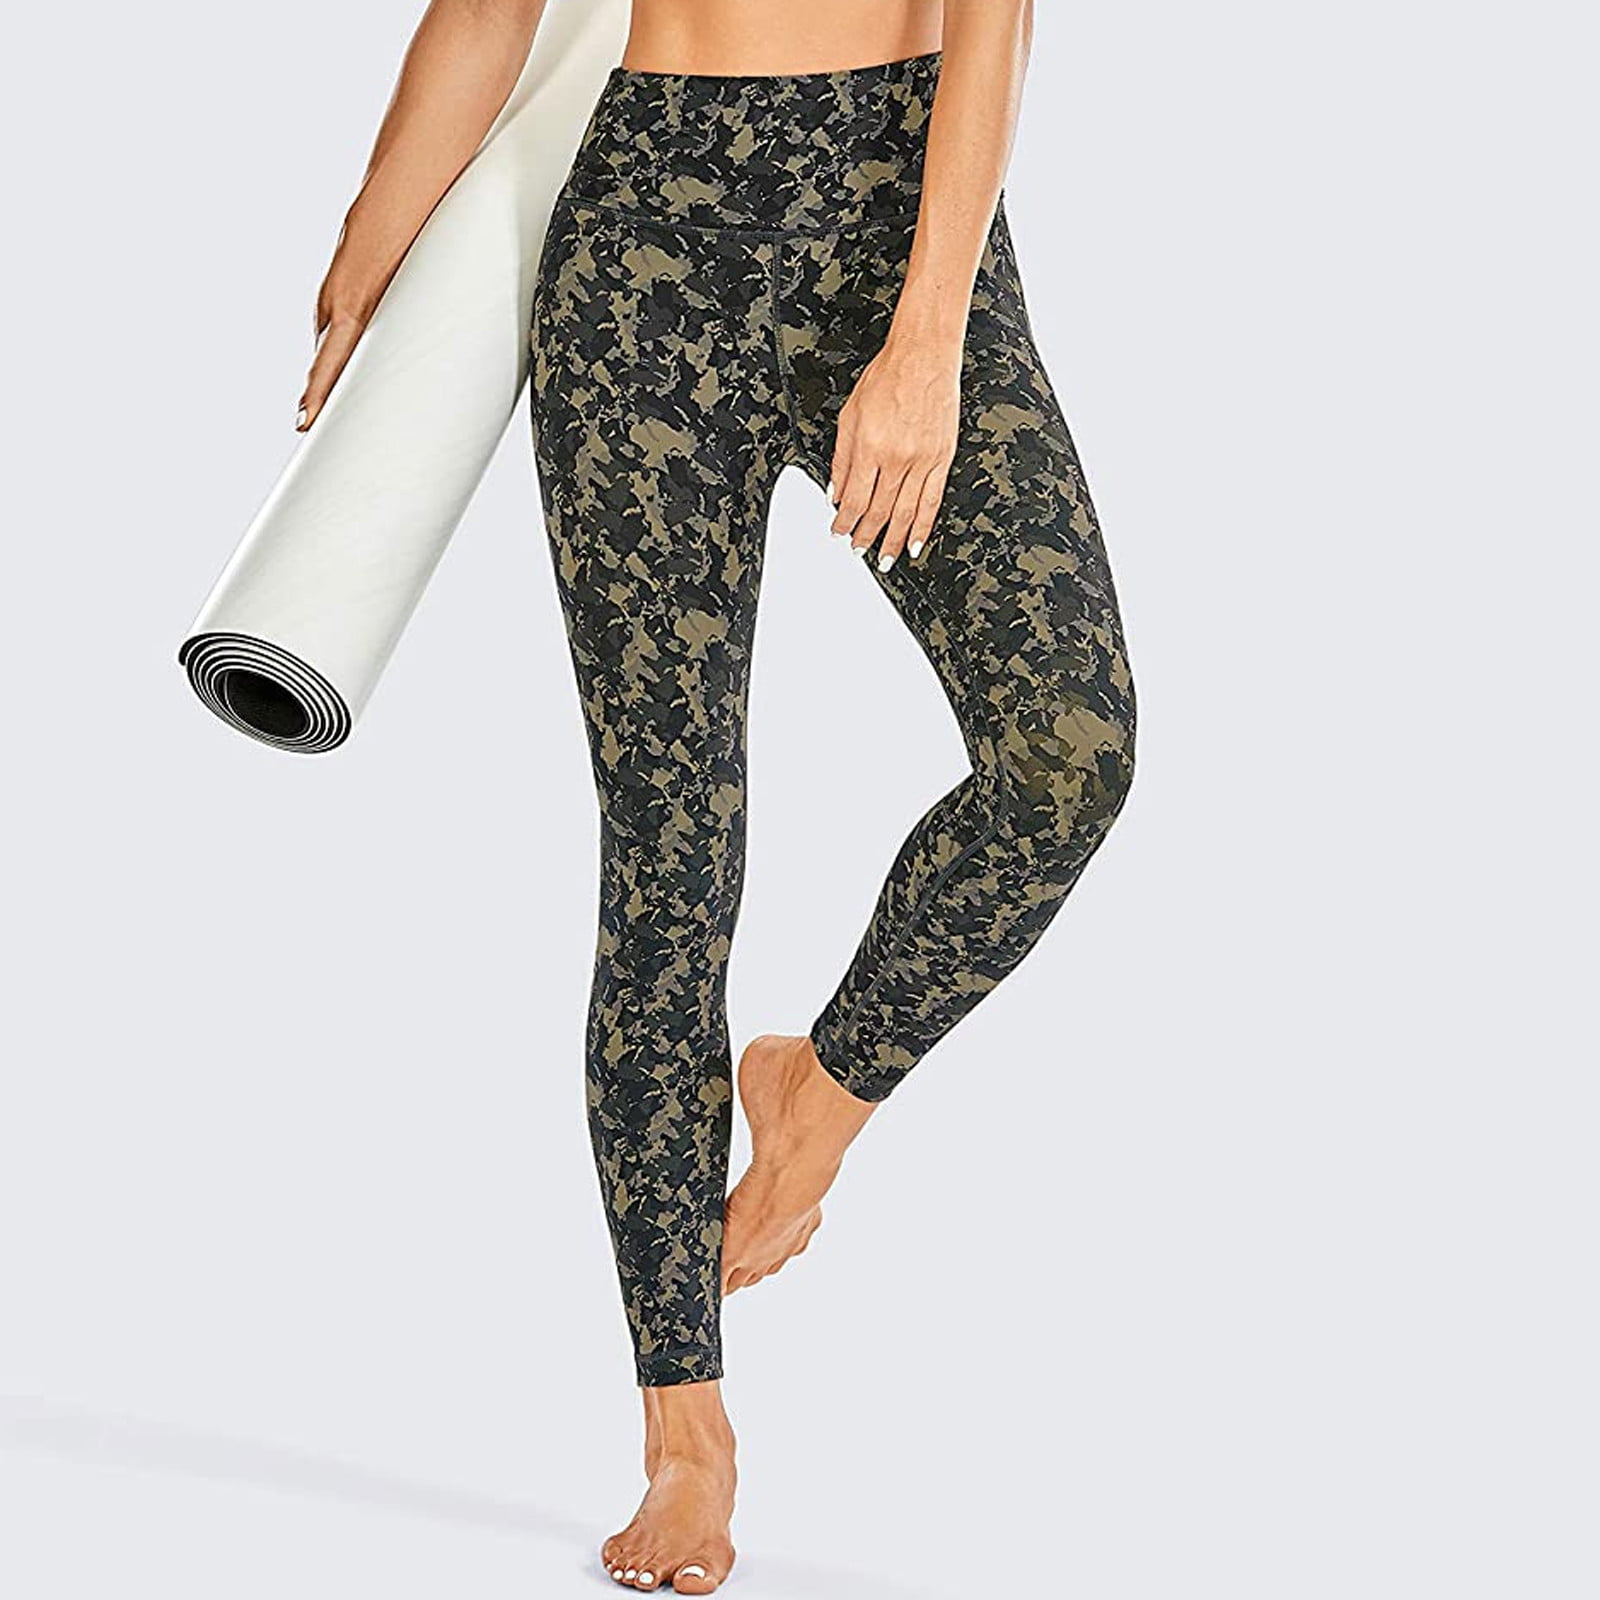 Aayomet Workout Out Running Leggings Sports Fitness Athletic Yoga